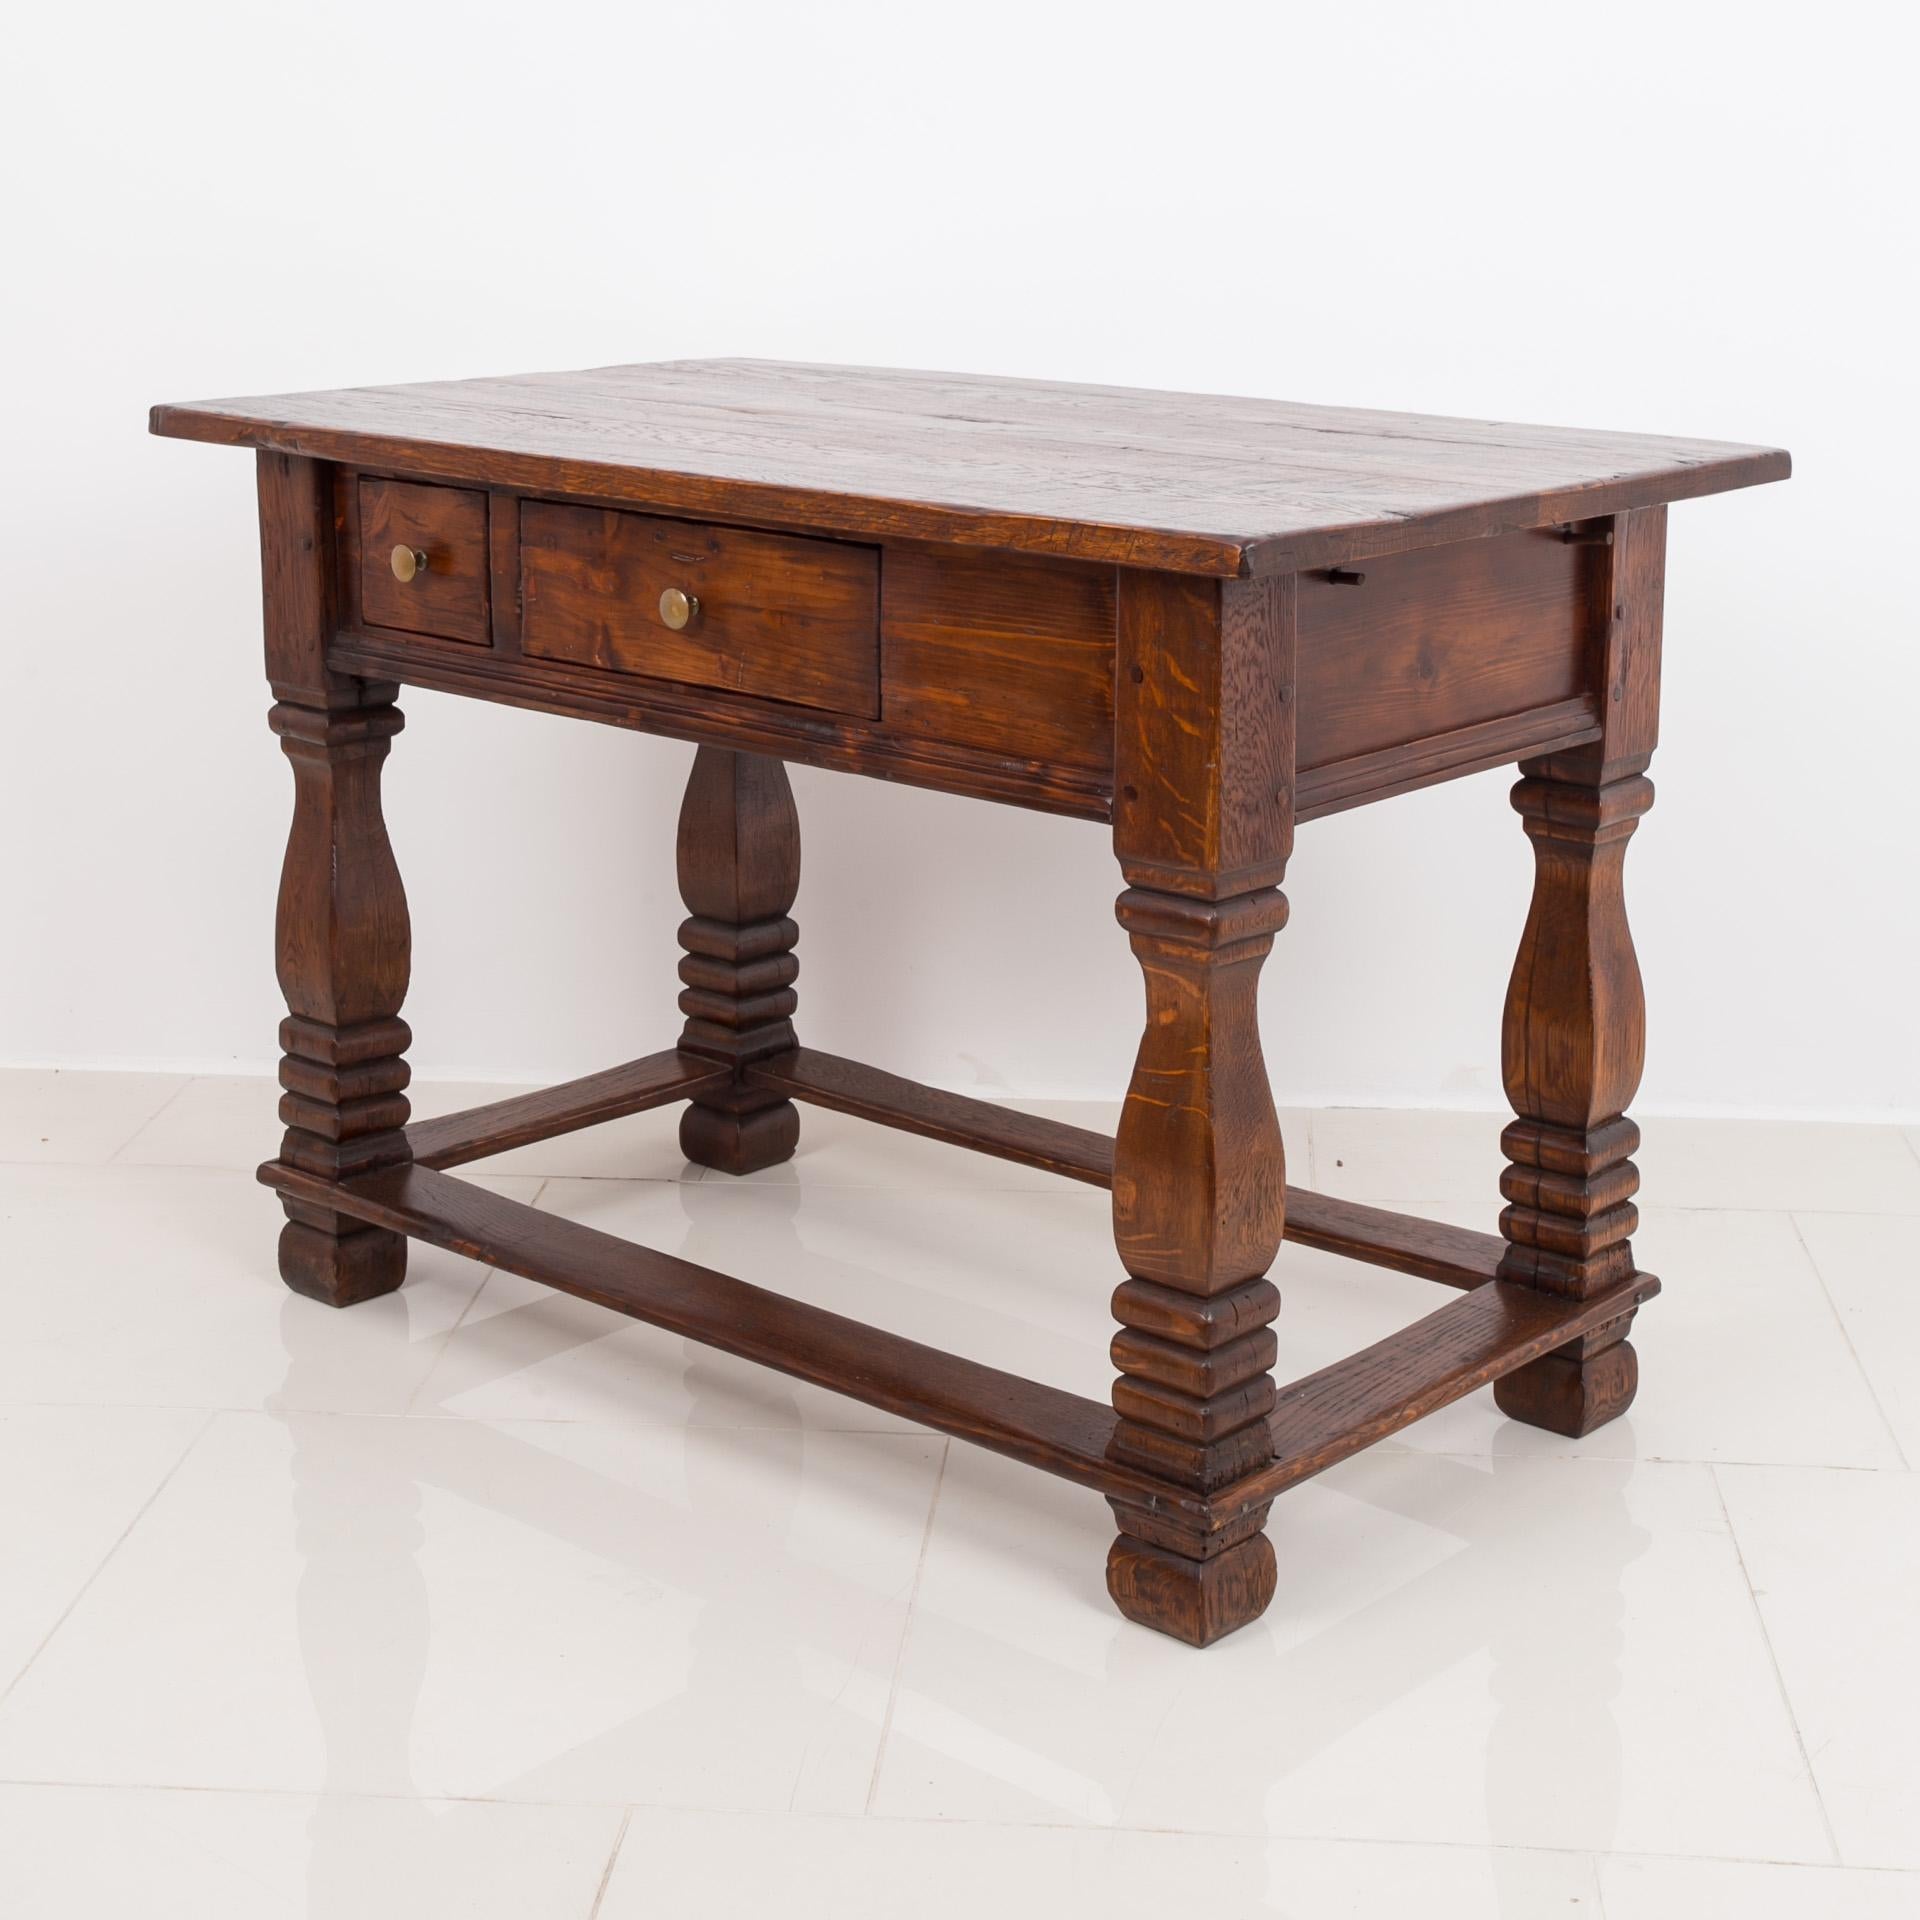 Solid Oak Table, 18th / 19th Century, Rustic Style, Prep or Dining Table 3